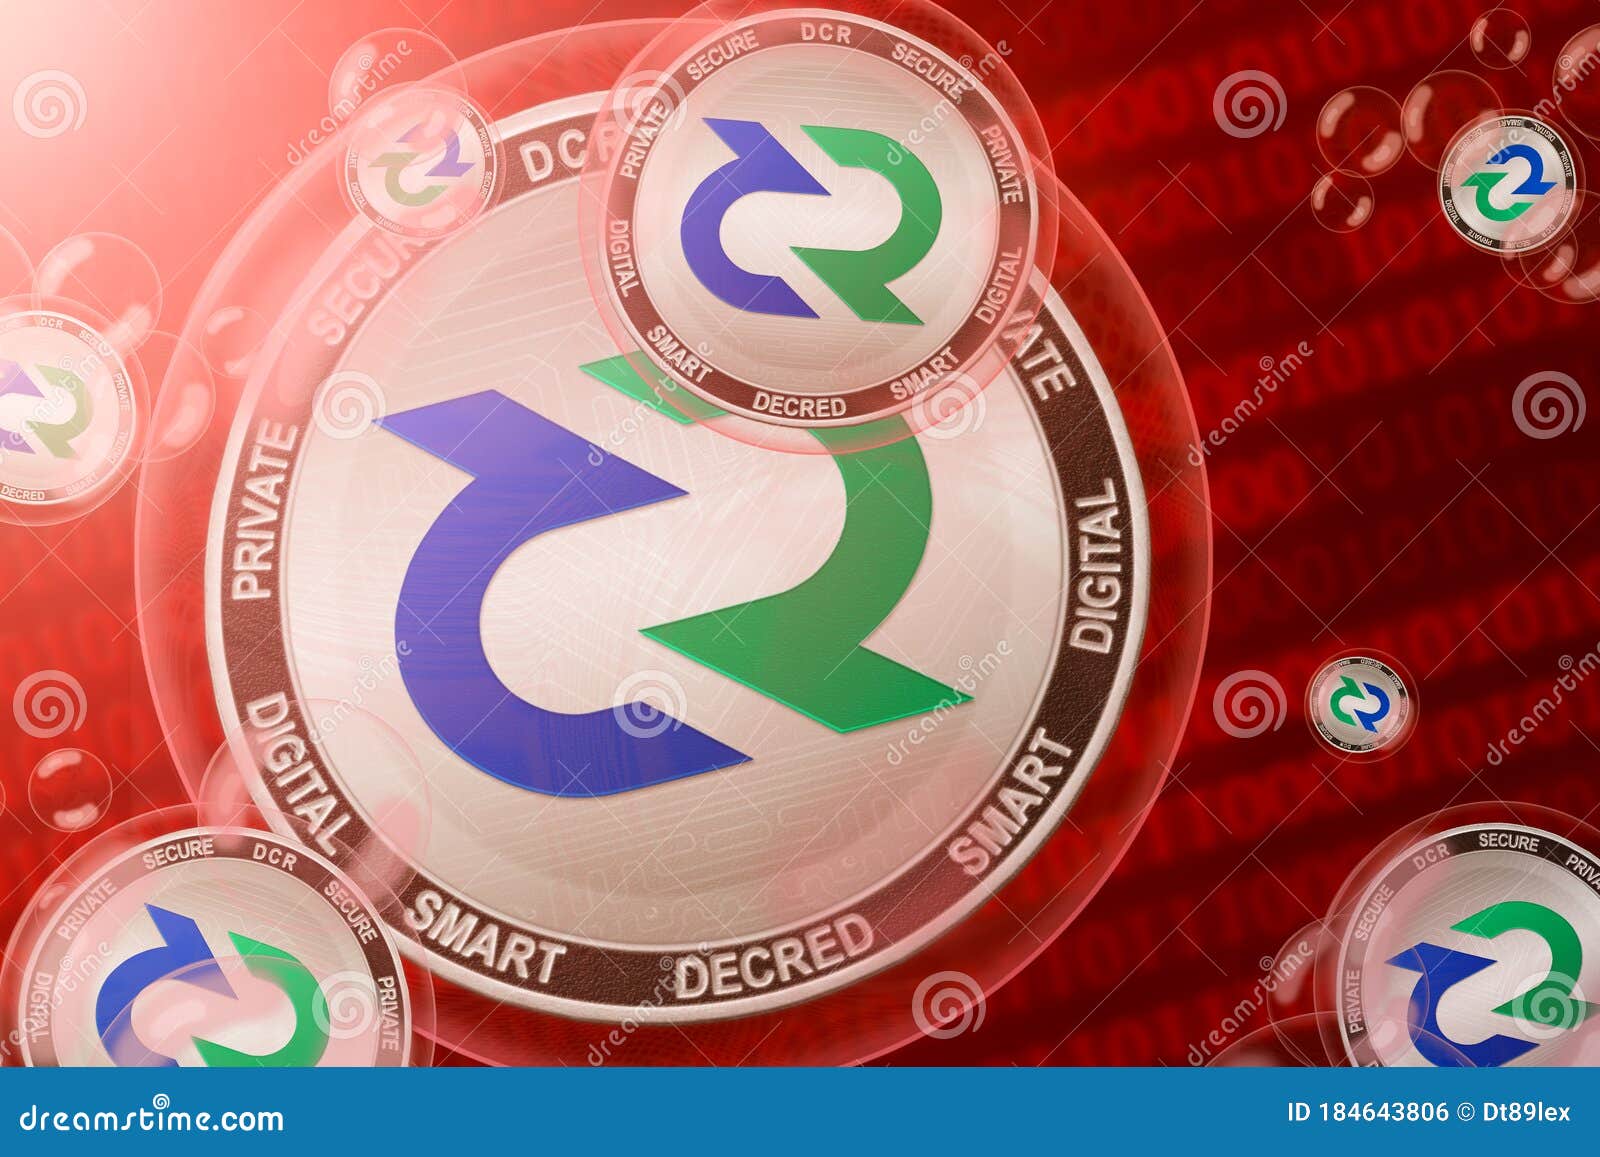 decred crash, bubble. decred dcr cryptocurrency coins in a bubbles on the binary code background